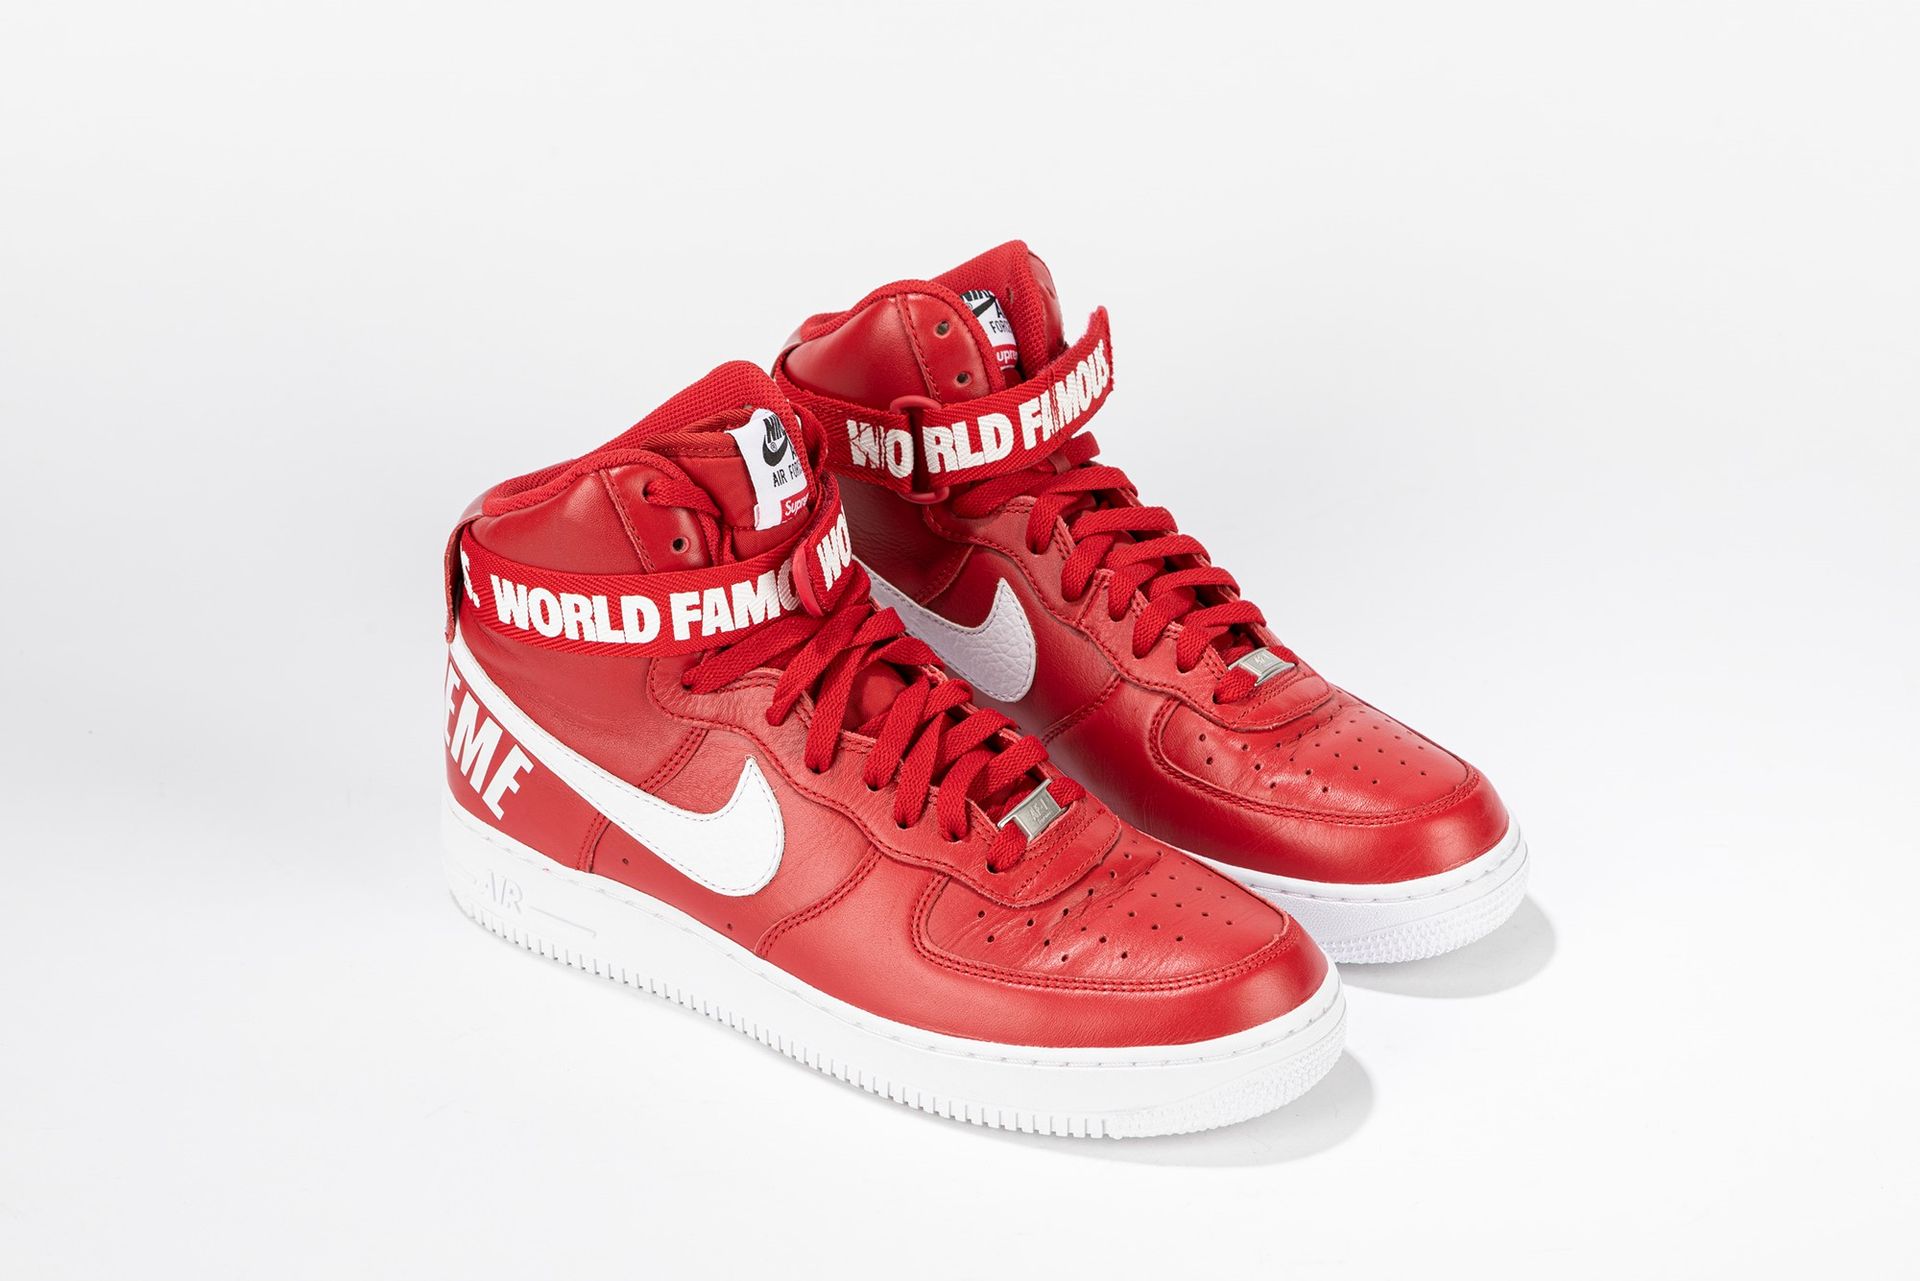 NIKE Air Force 1 High Supreme World FamousRed | Taille US 9.5 EUR 43, 2014


Nik&hellip;